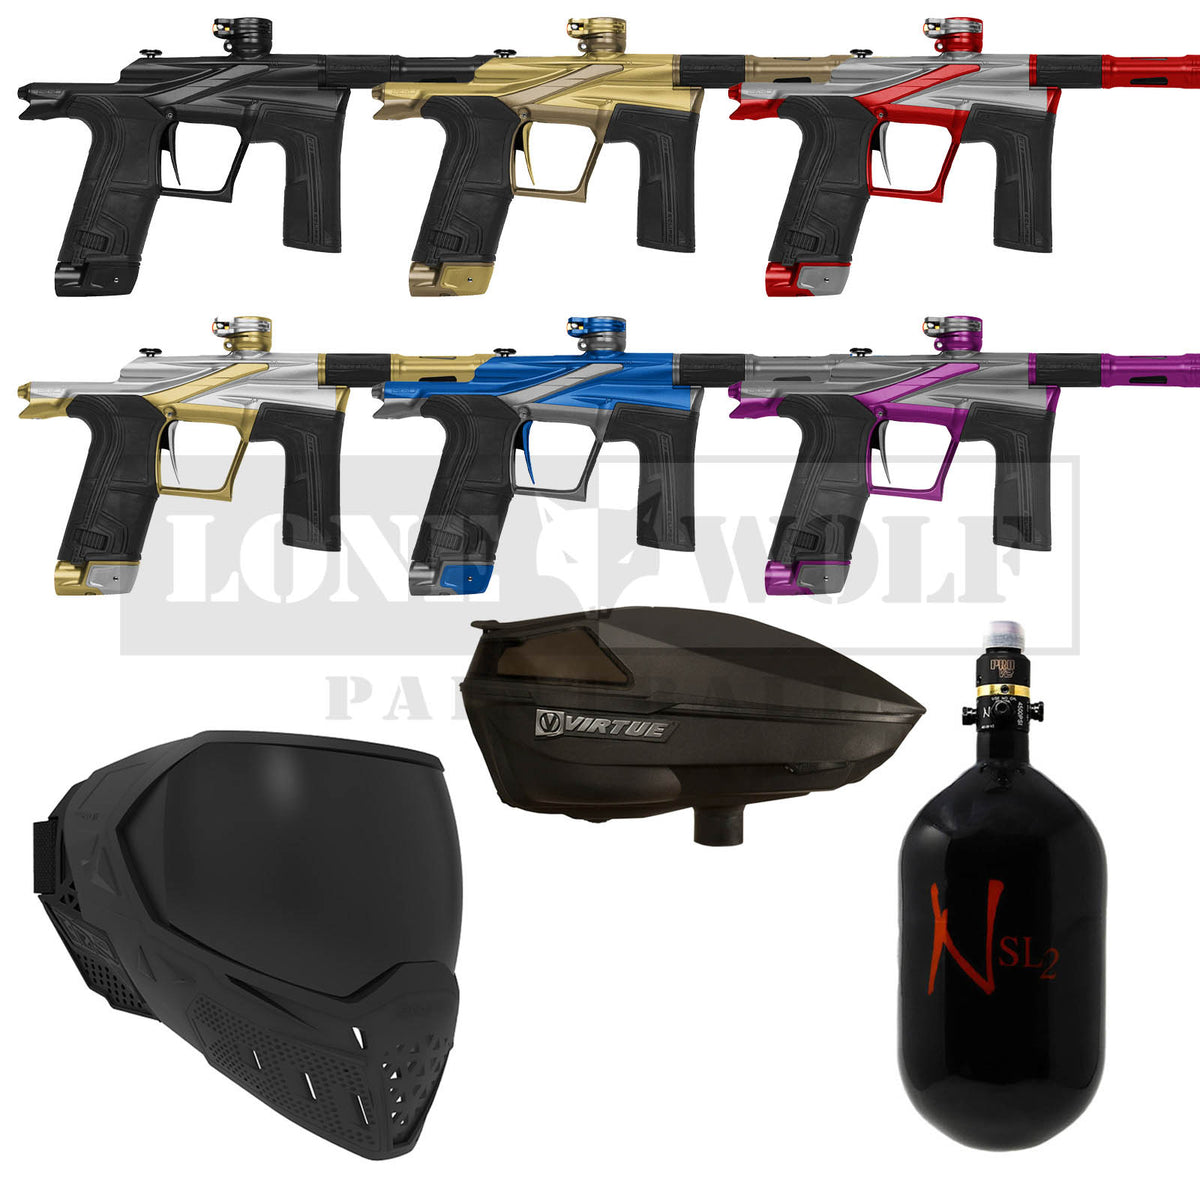 Used Planet Eclipse LV2 Paintball Gun - Crusade w/ 4 s63 Inserts